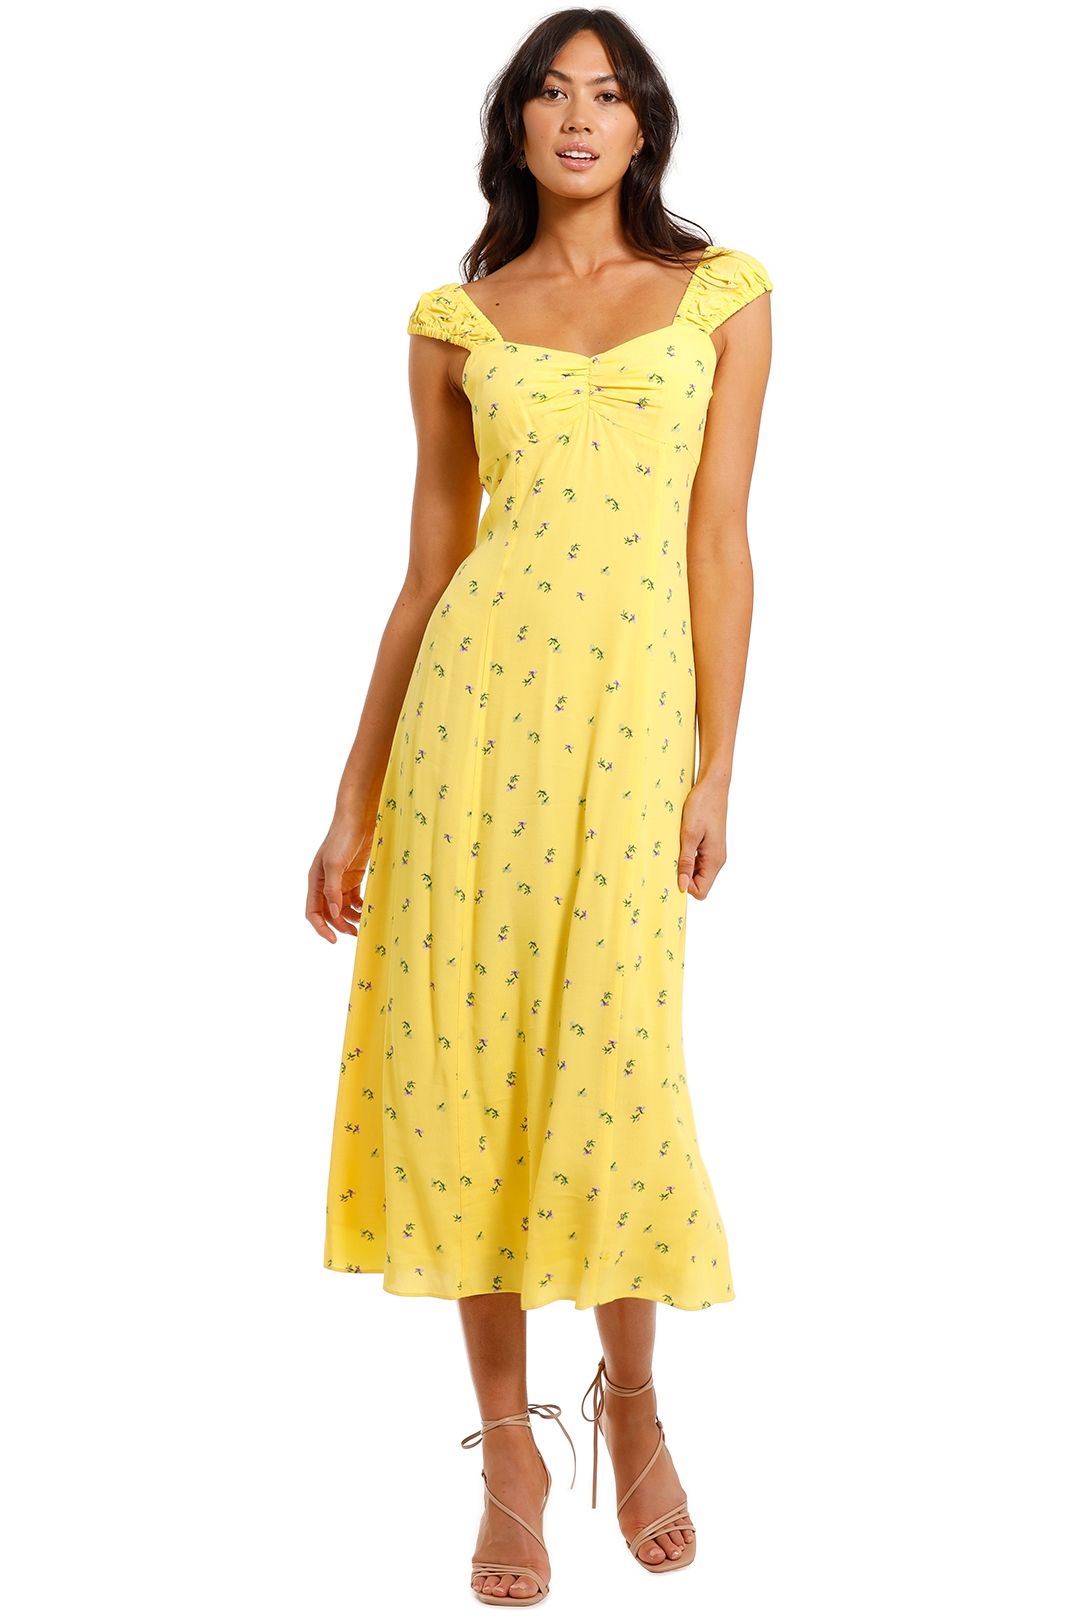 Whistles Forget Me Not Dress Yellow